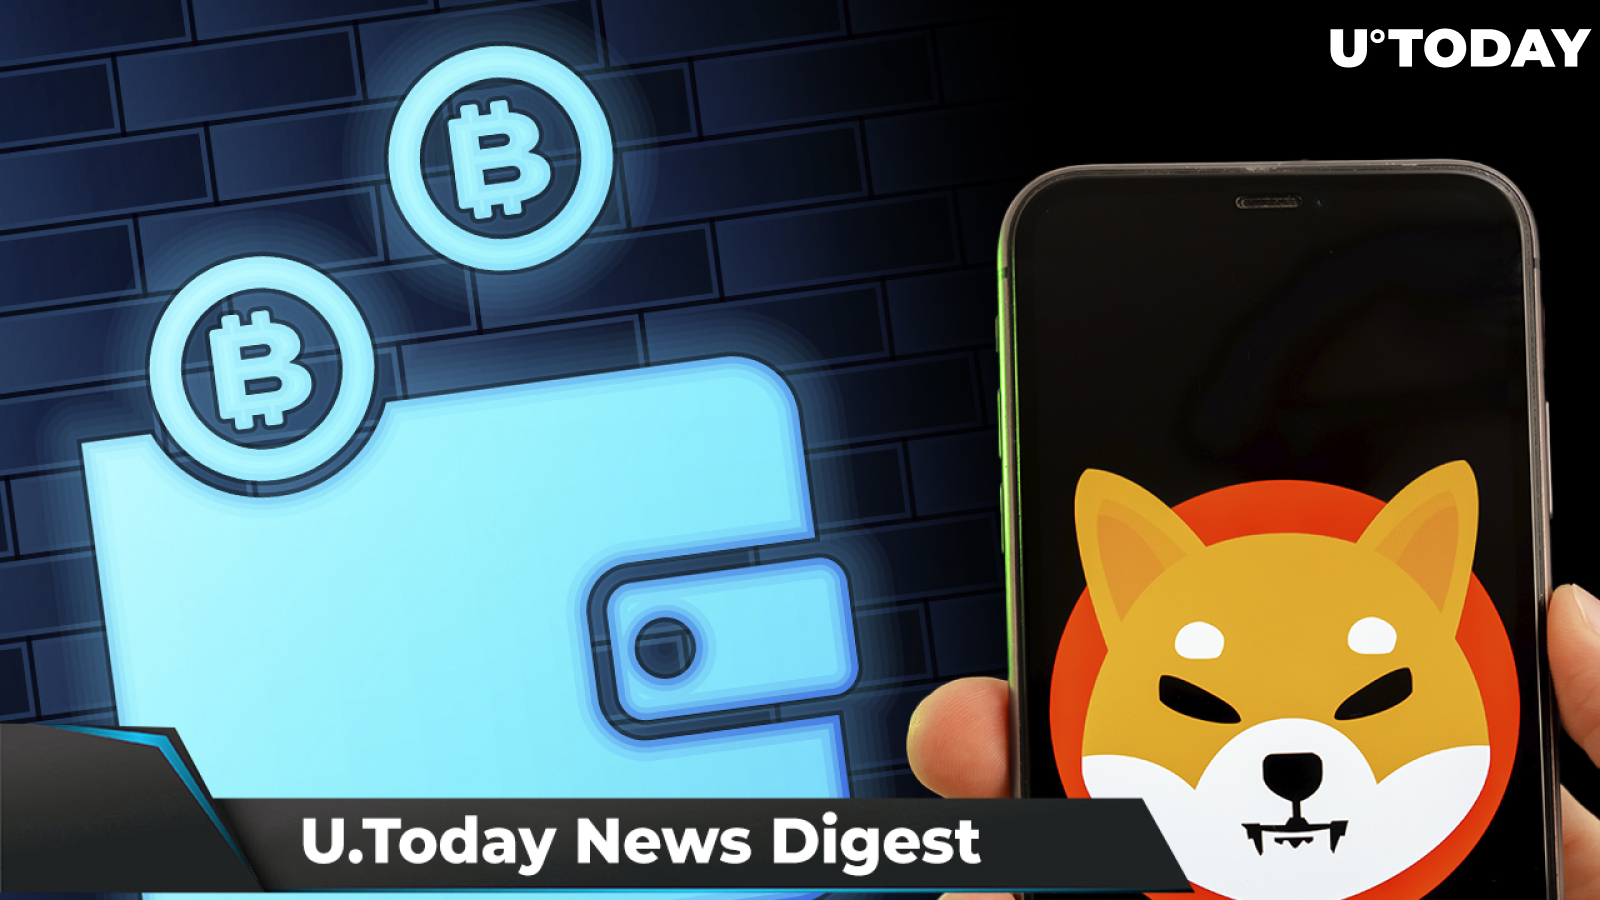 Ancient Wallet with 407 BTC Awakens, Wirex Adds SHIB, Binance Now Has Its Own Payment Provider: Crypto News Digest by U.Today